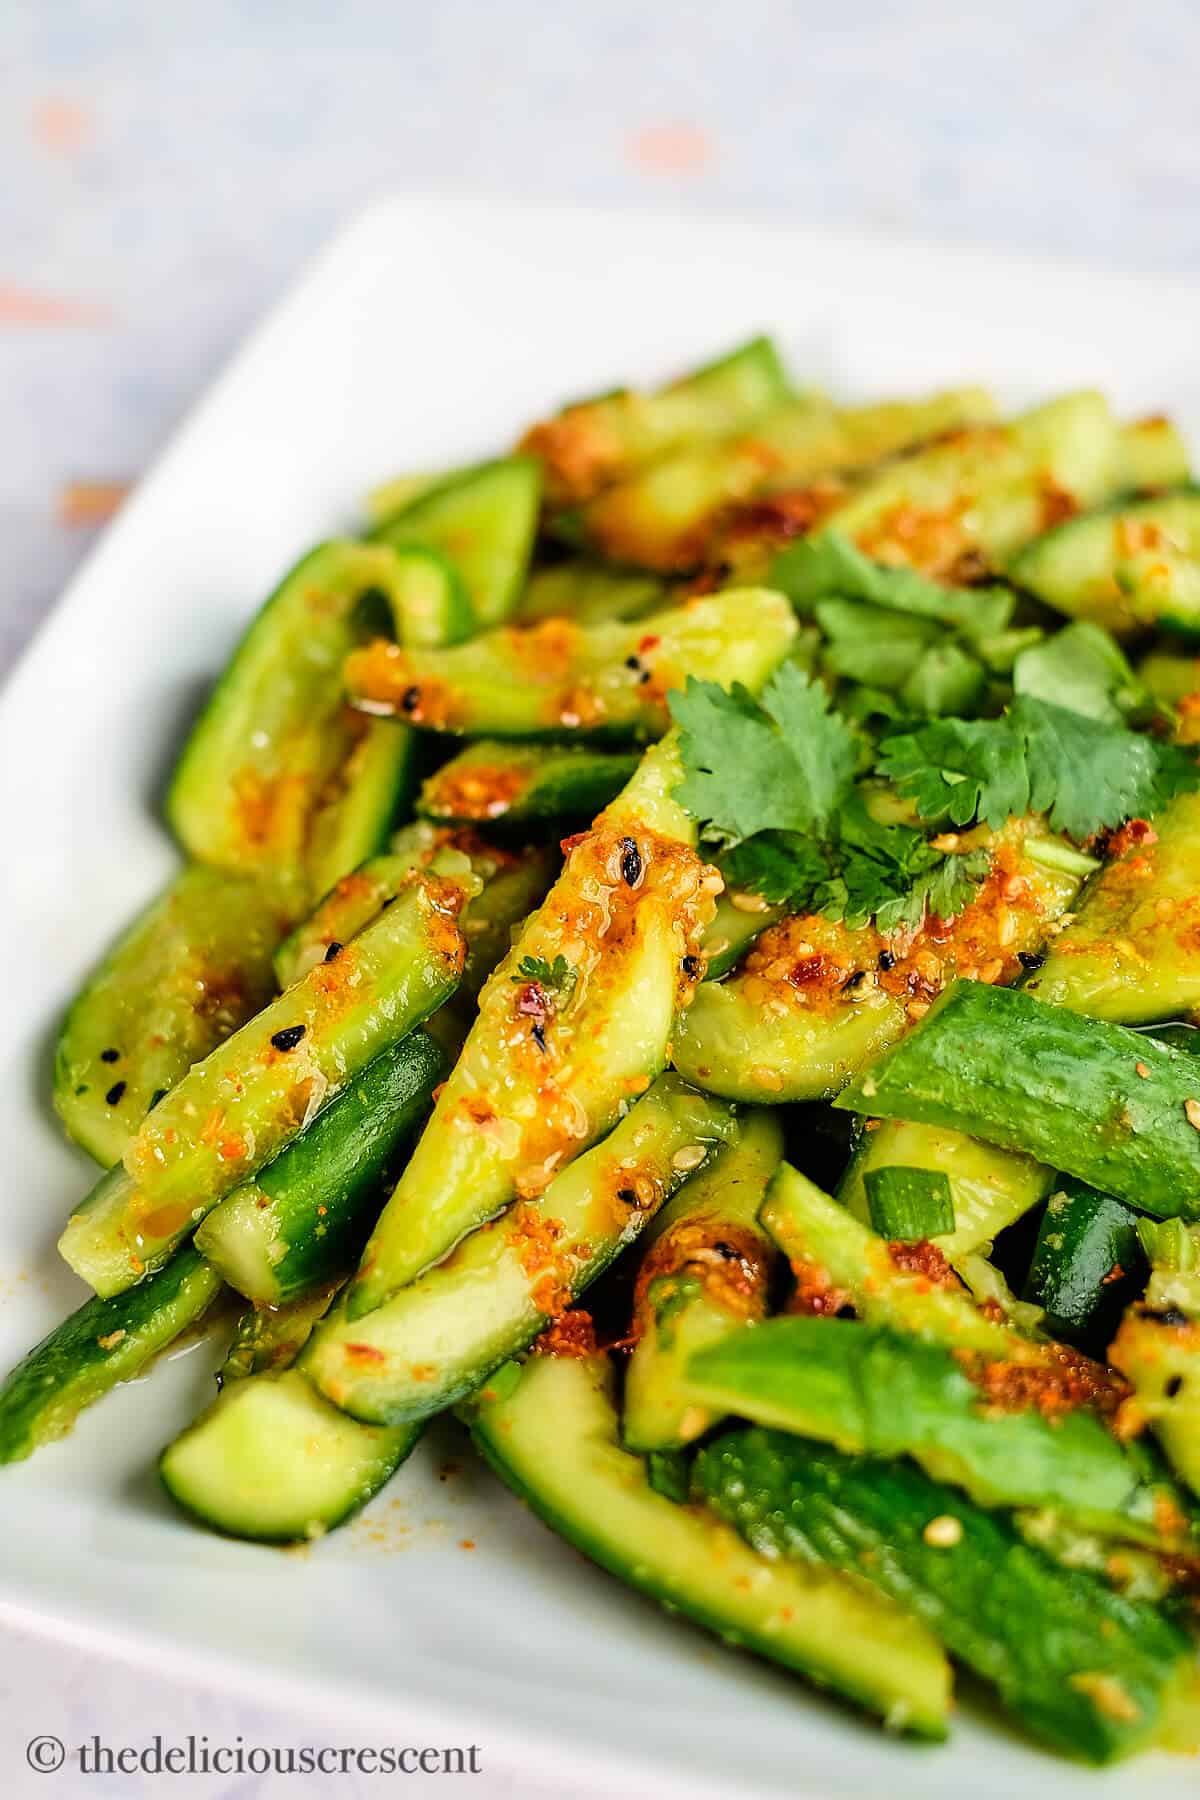 Pickled cucumber salad prepared in a smashed style with Asian spices.